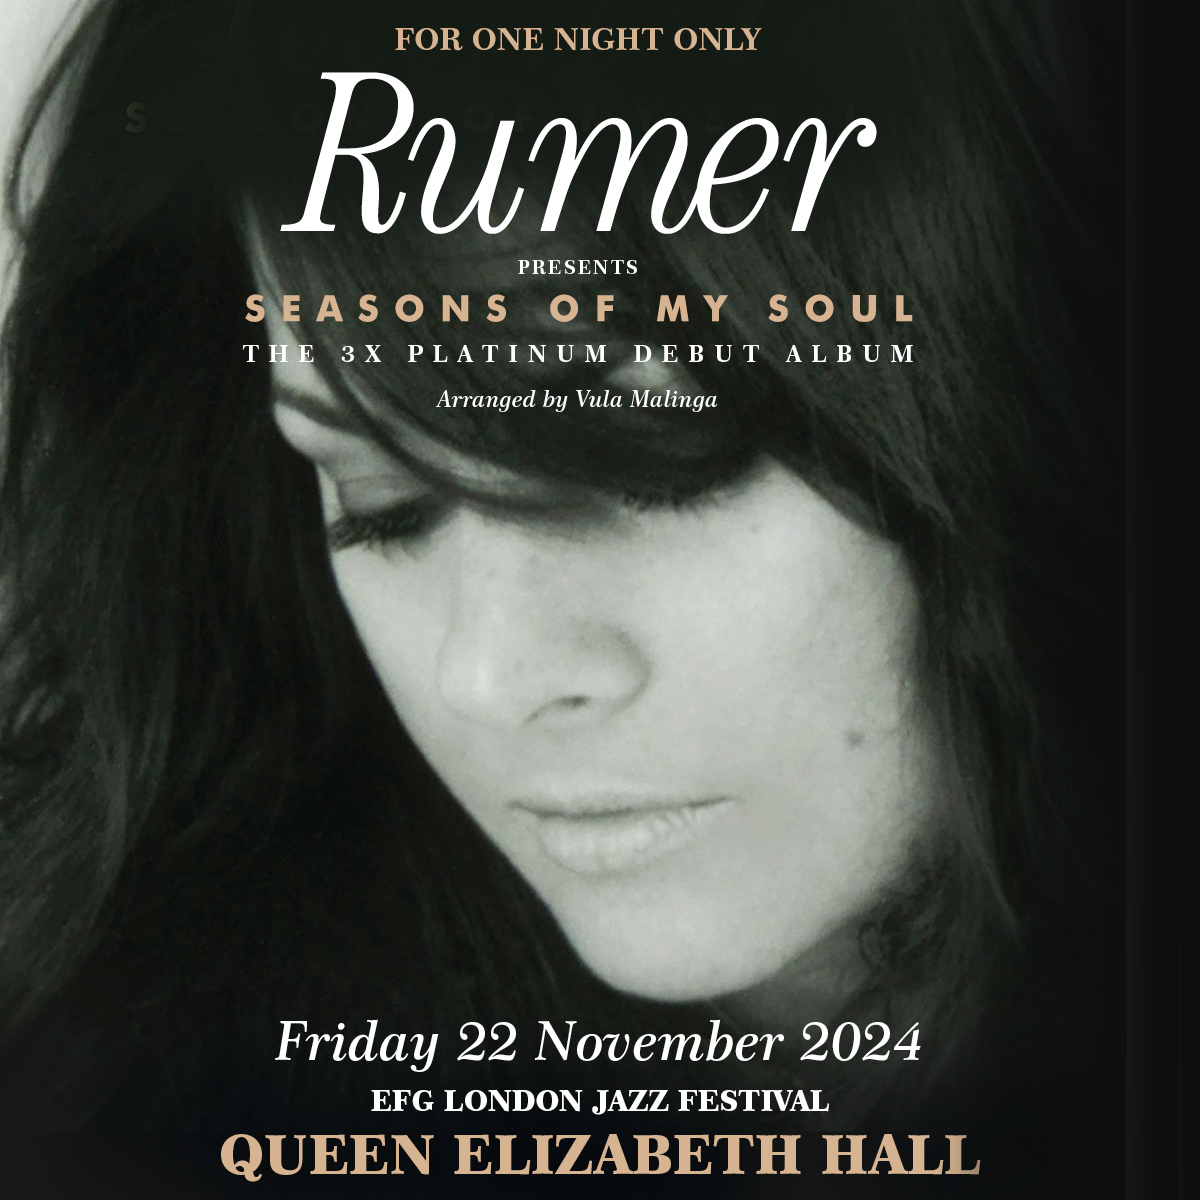 Captivating British singer-songwriter, @Rumersongs is set to grace the stage of London’s Queen Elizabeth Hall to perform her acclaimed 3x platinum debut album, 'Seasons of My Soul' in full in November! Grab tickets this Friday at 10am 🎟️ gigst.rs/rumer